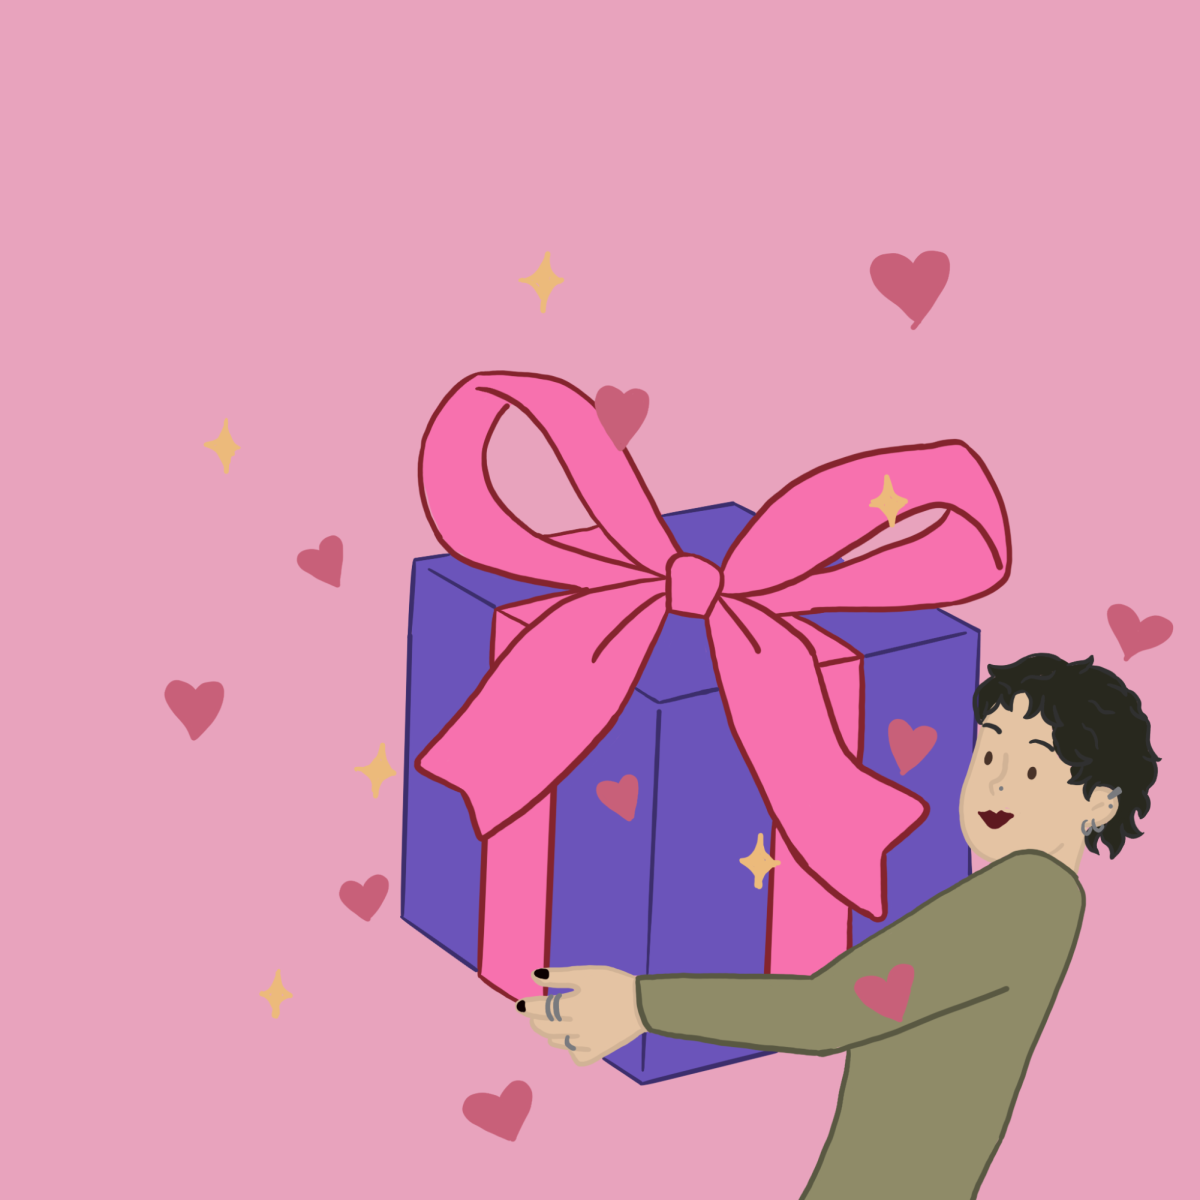 OPINION: Valentines Day is too commercialized